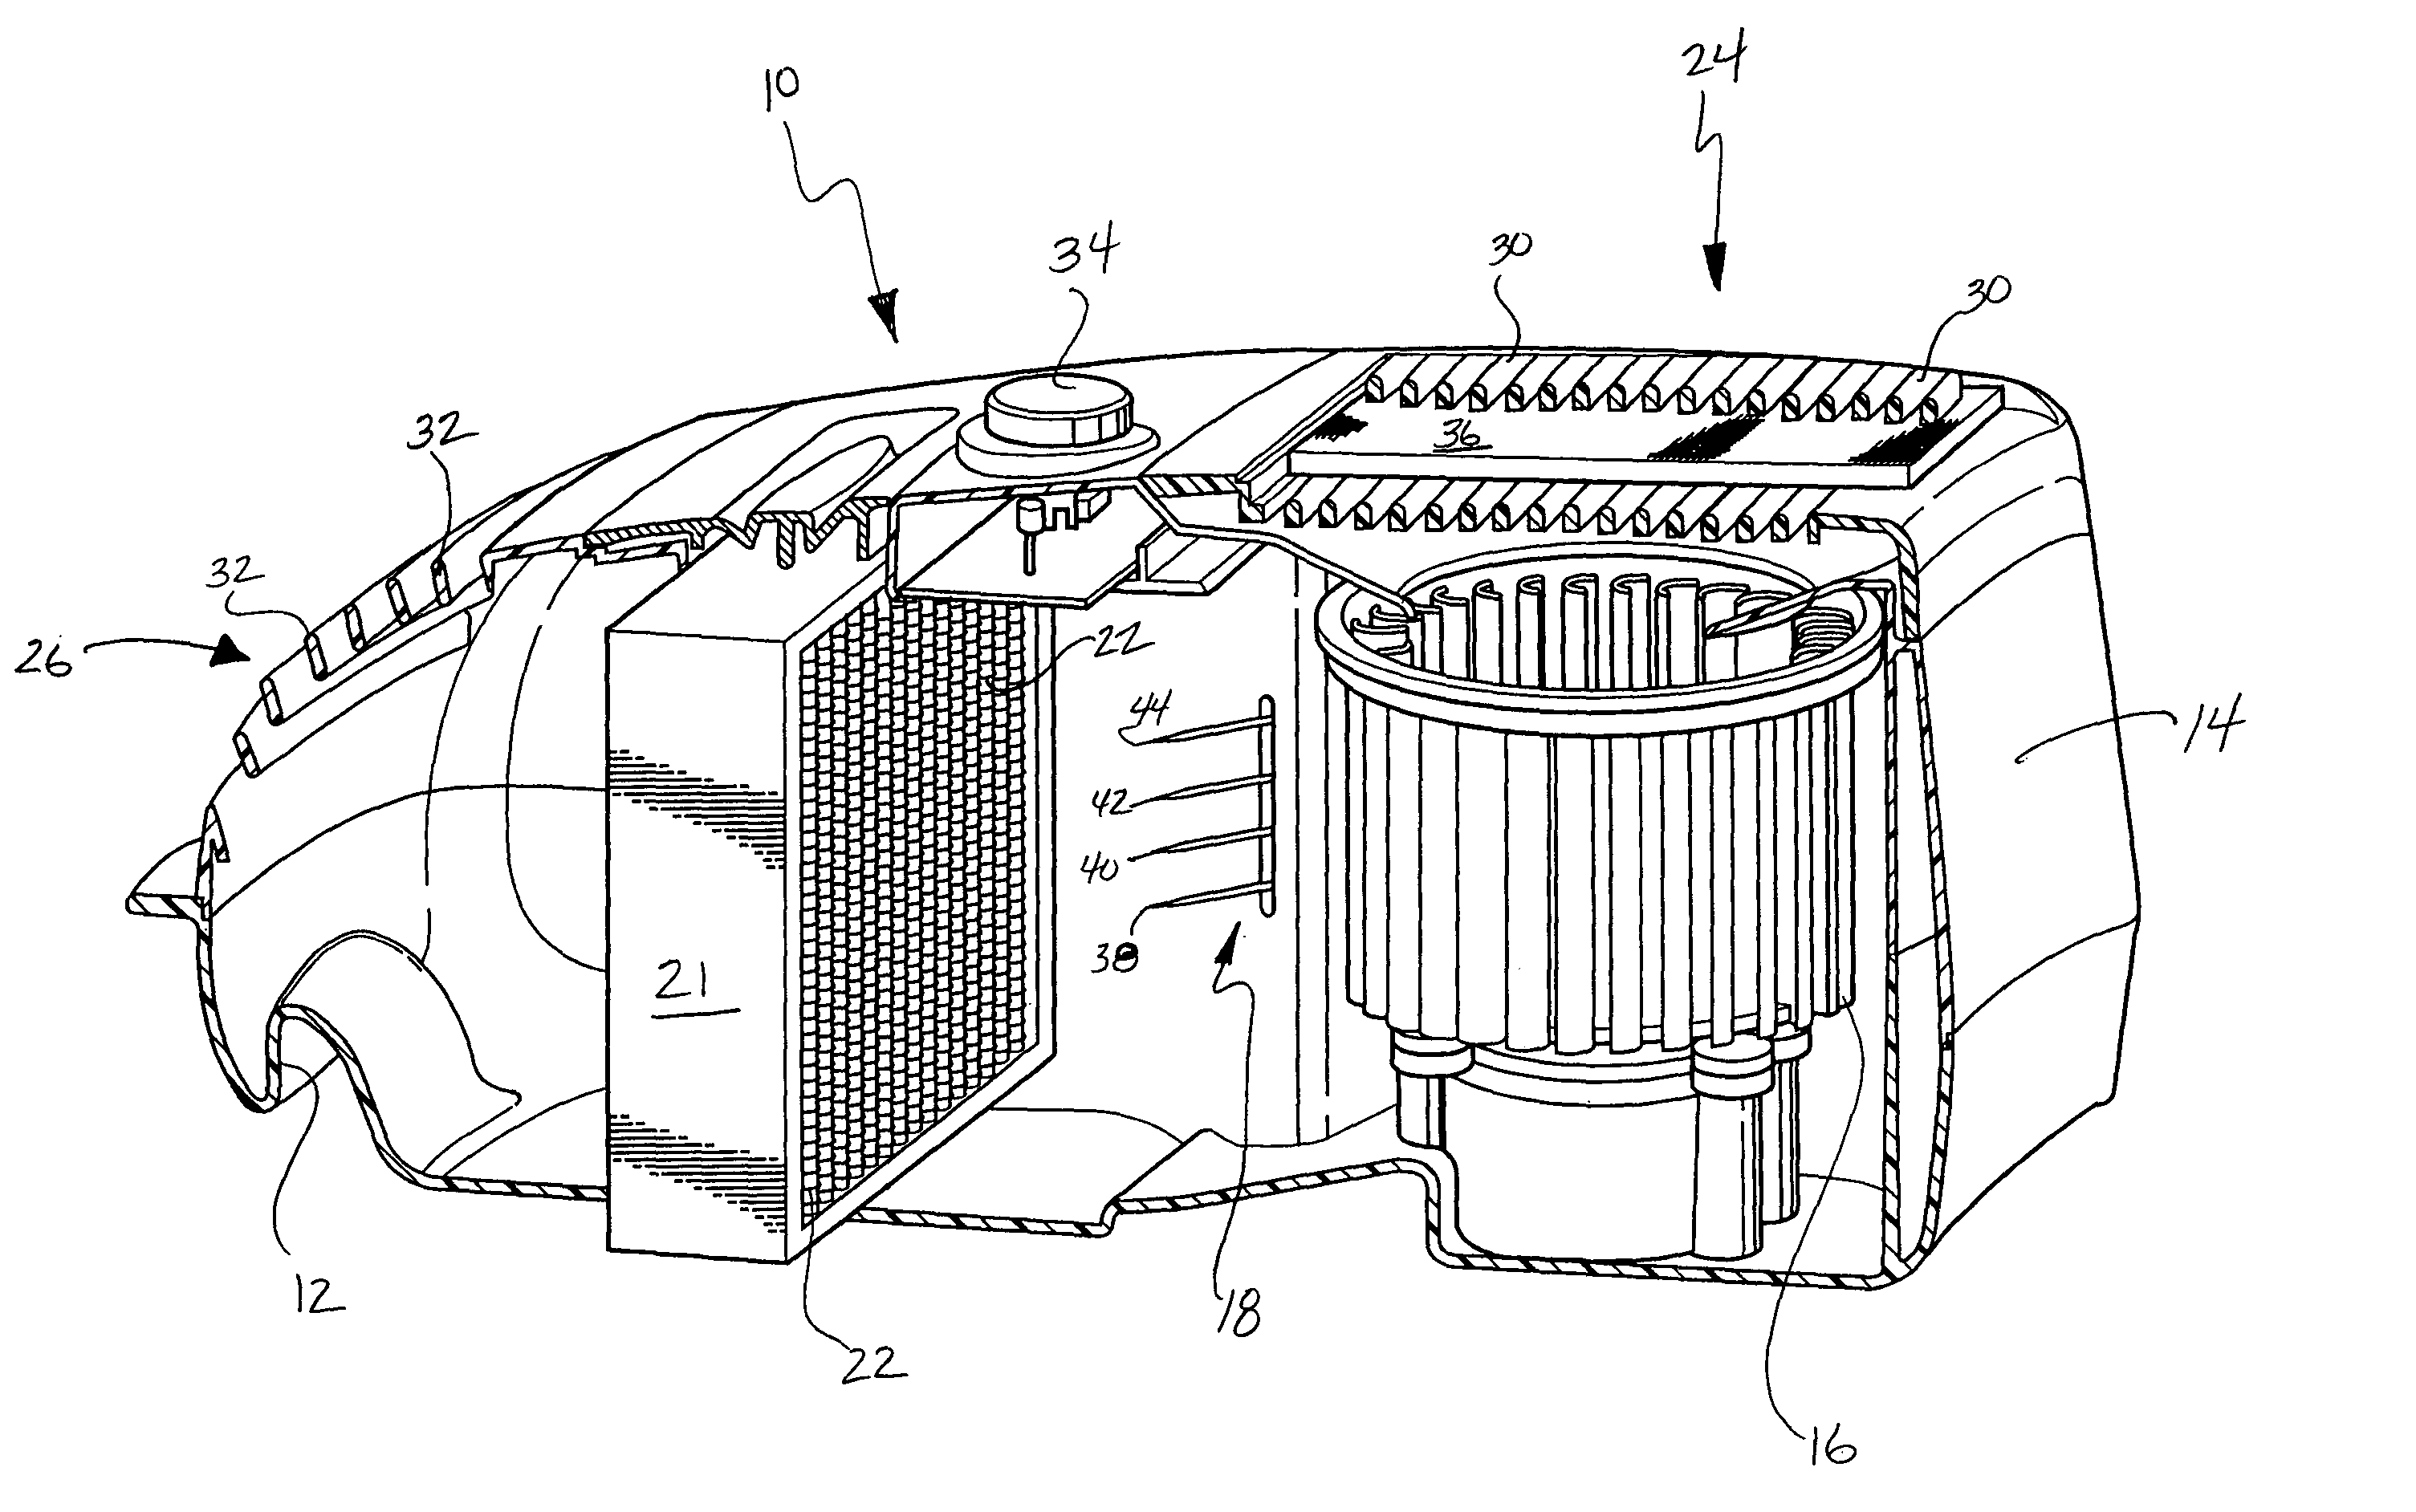 Portable air filtration system utilizing a conductive coating and a filter for use therein